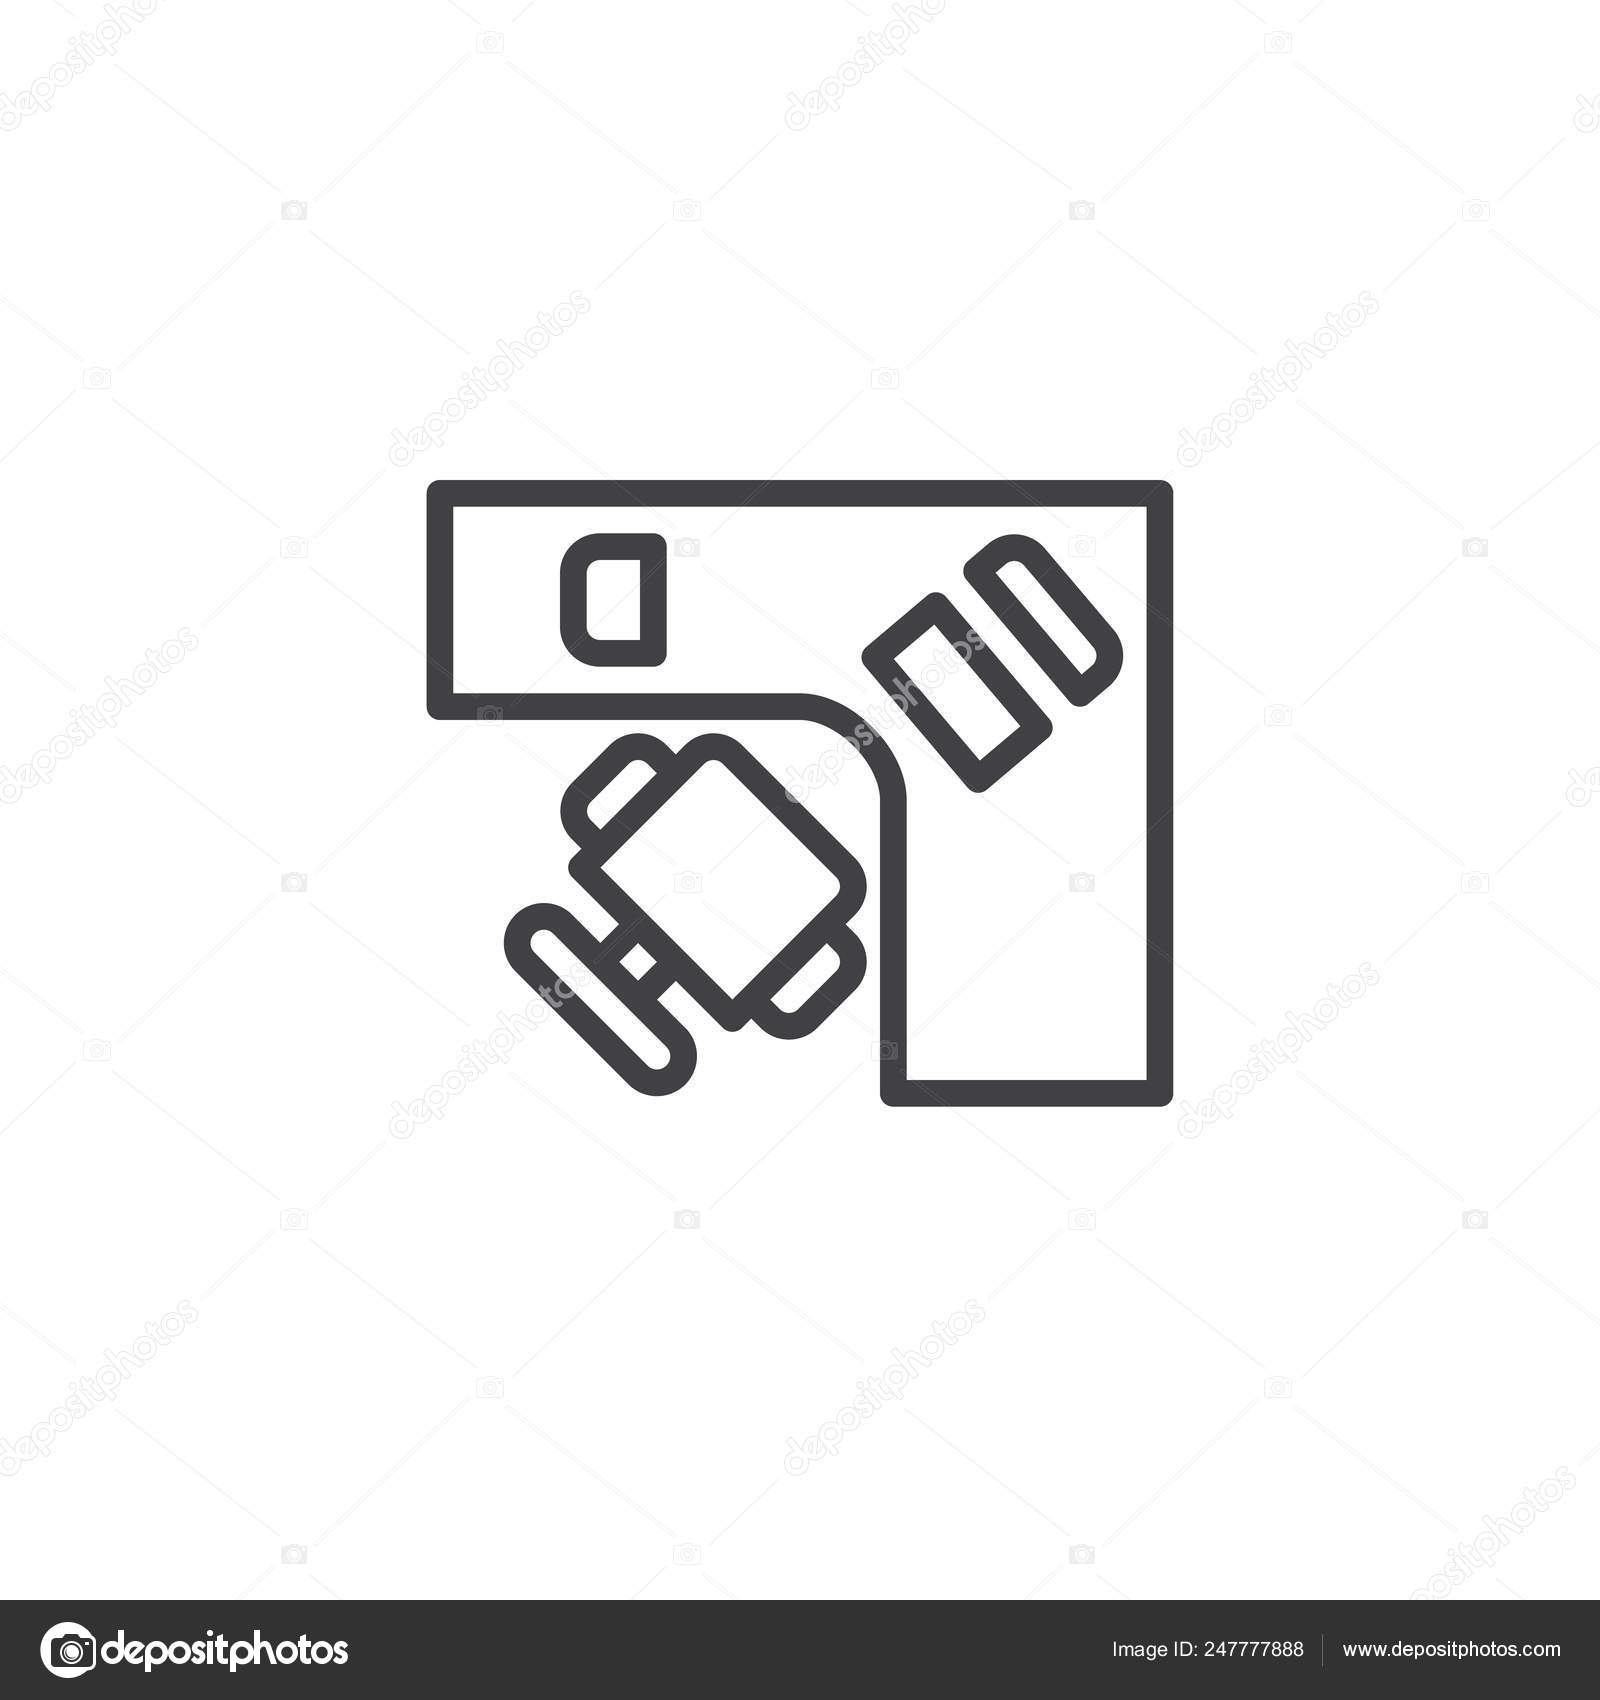 Chair Top View Outline Corner Computer Desk Chair Top View Outline Icon Linear Style Stock Vector C Avicons 247777888 Free chair icons in various ui design styles for web, mobile, and graphic design projects. https depositphotos com 247777888 stock illustration corner computer desk chair top html